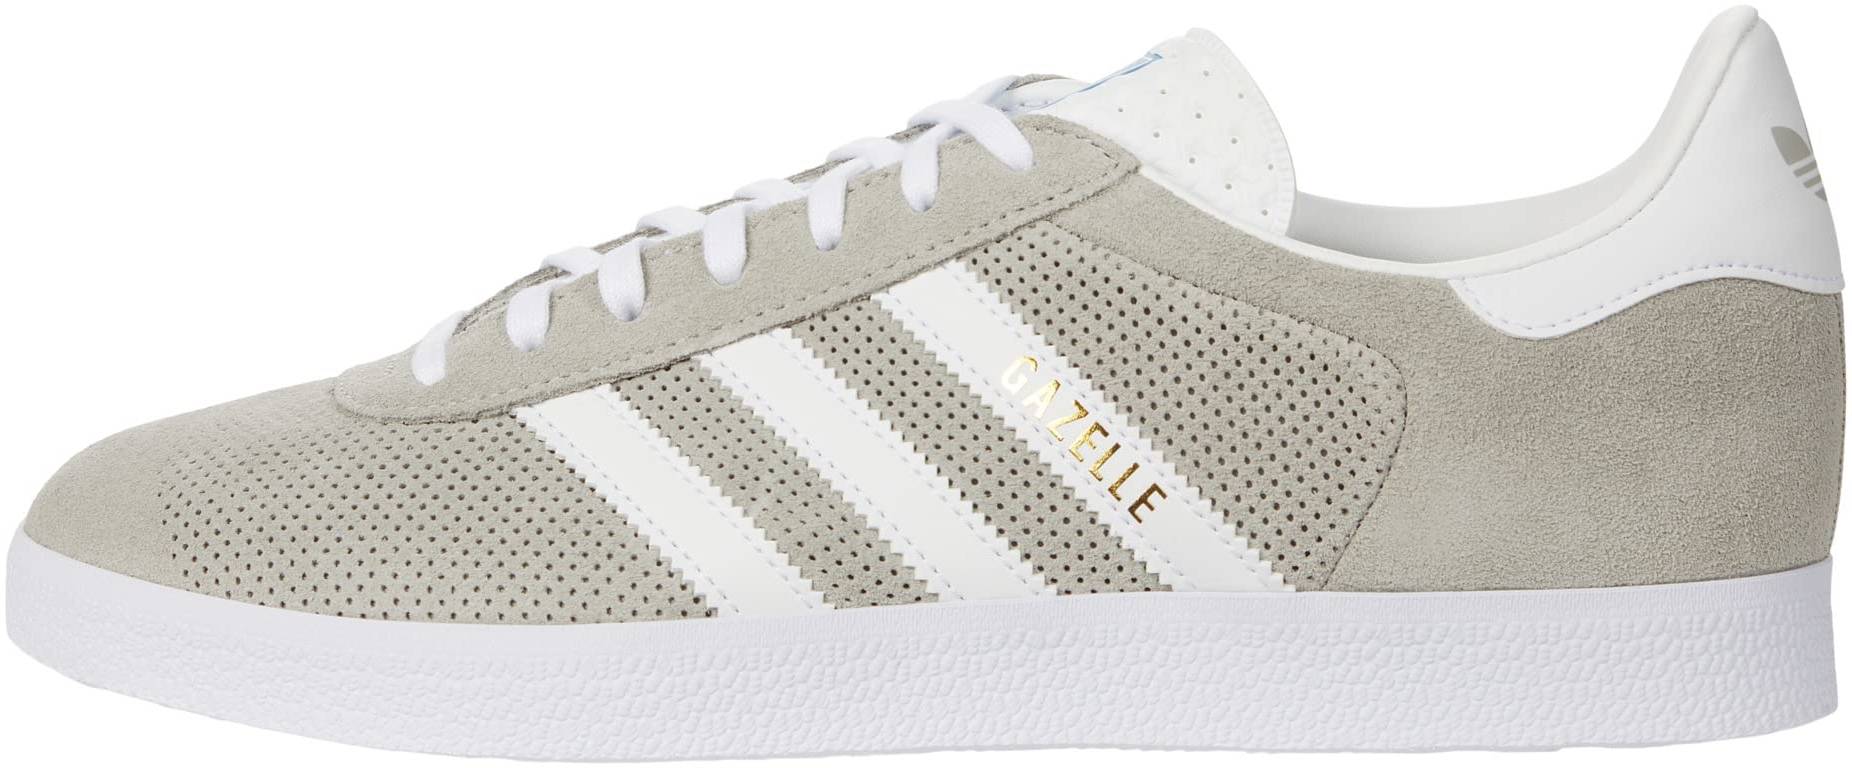 Adidas Gazelle sneakers in 5 colors (only $53) | RunRepeat